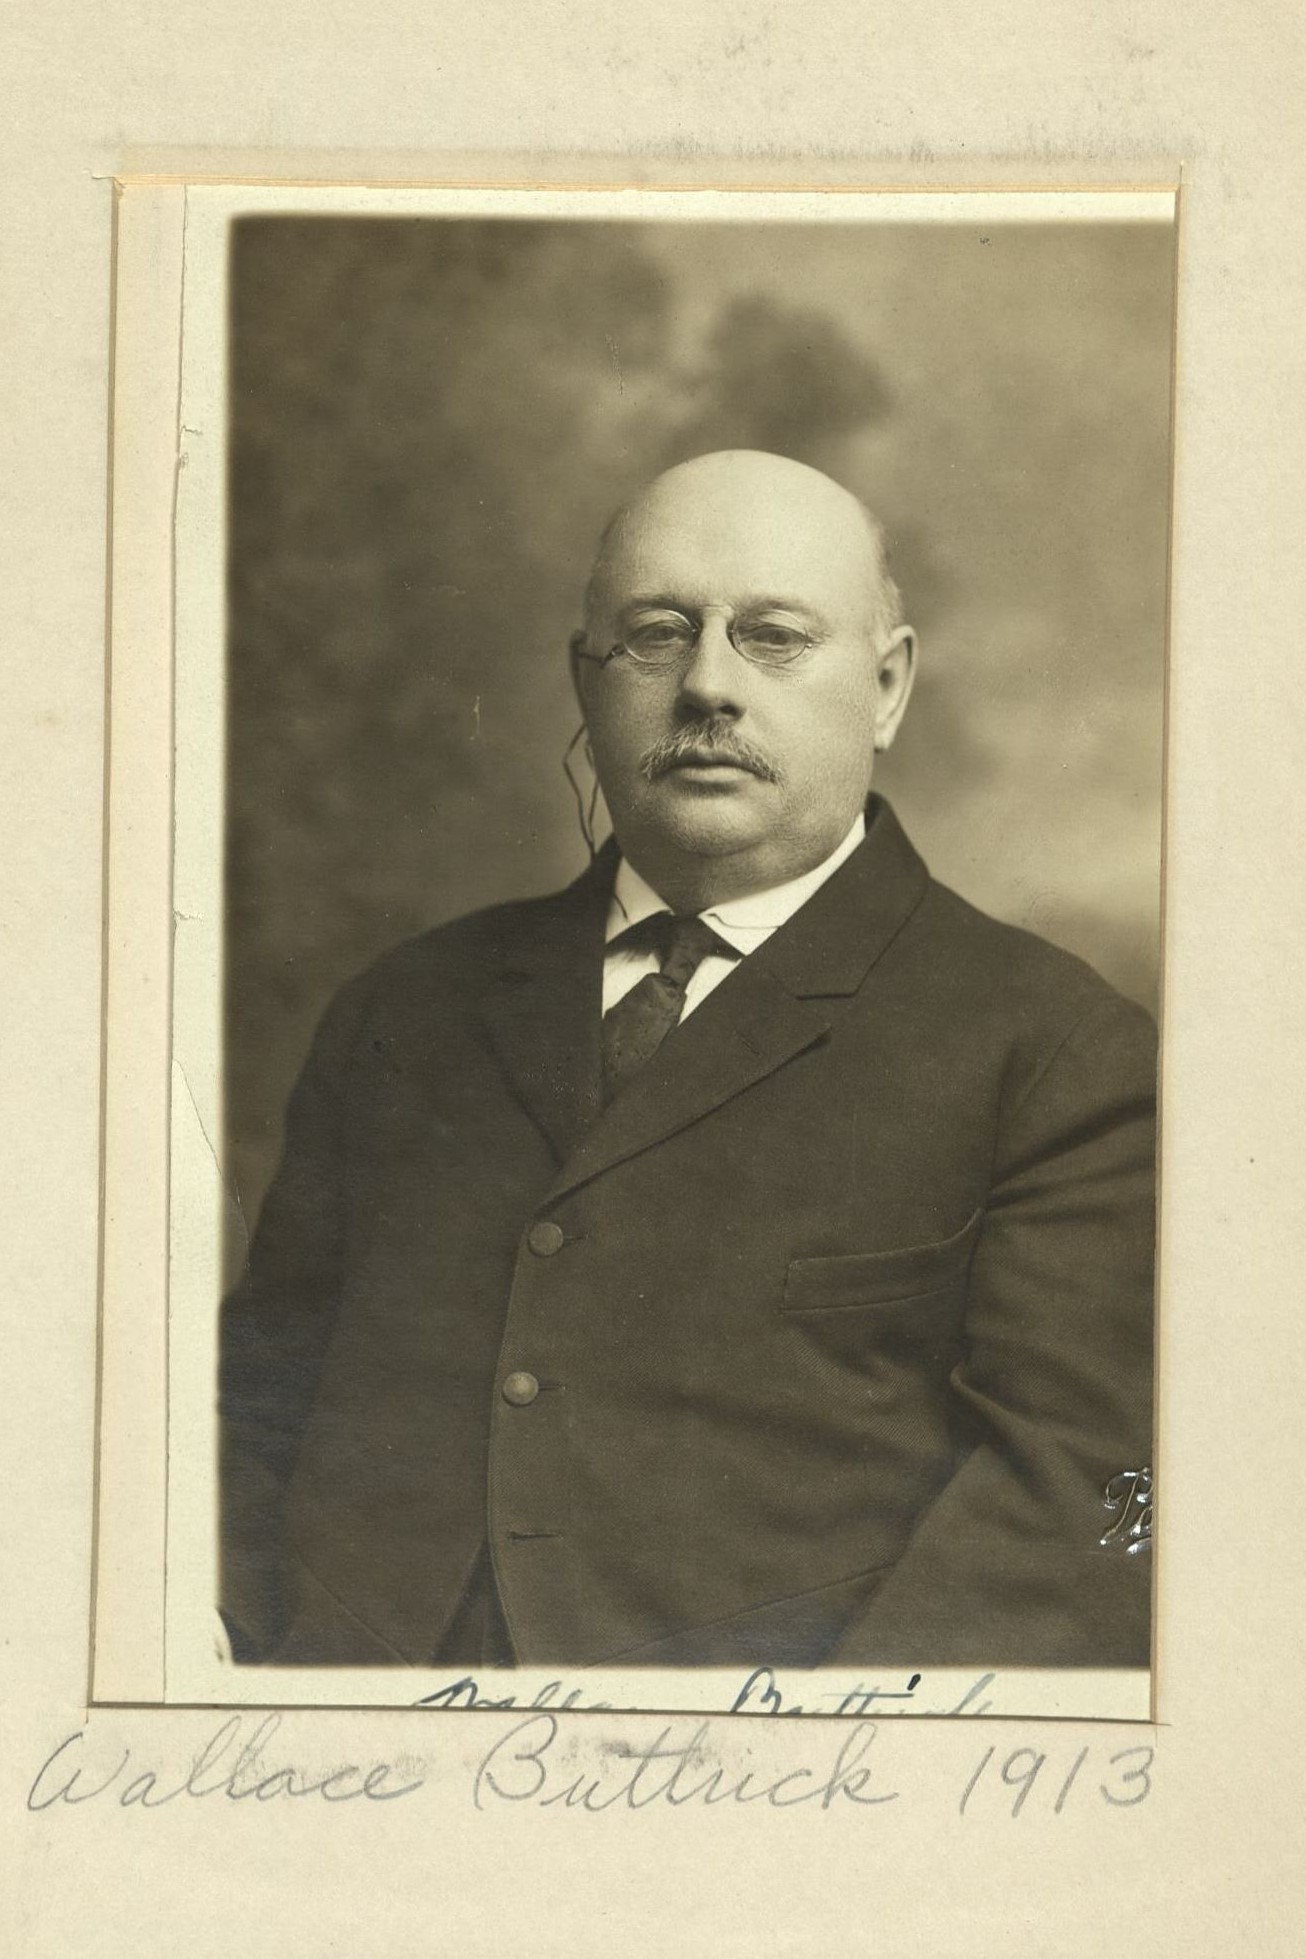 Member portrait of Wallace Buttrick